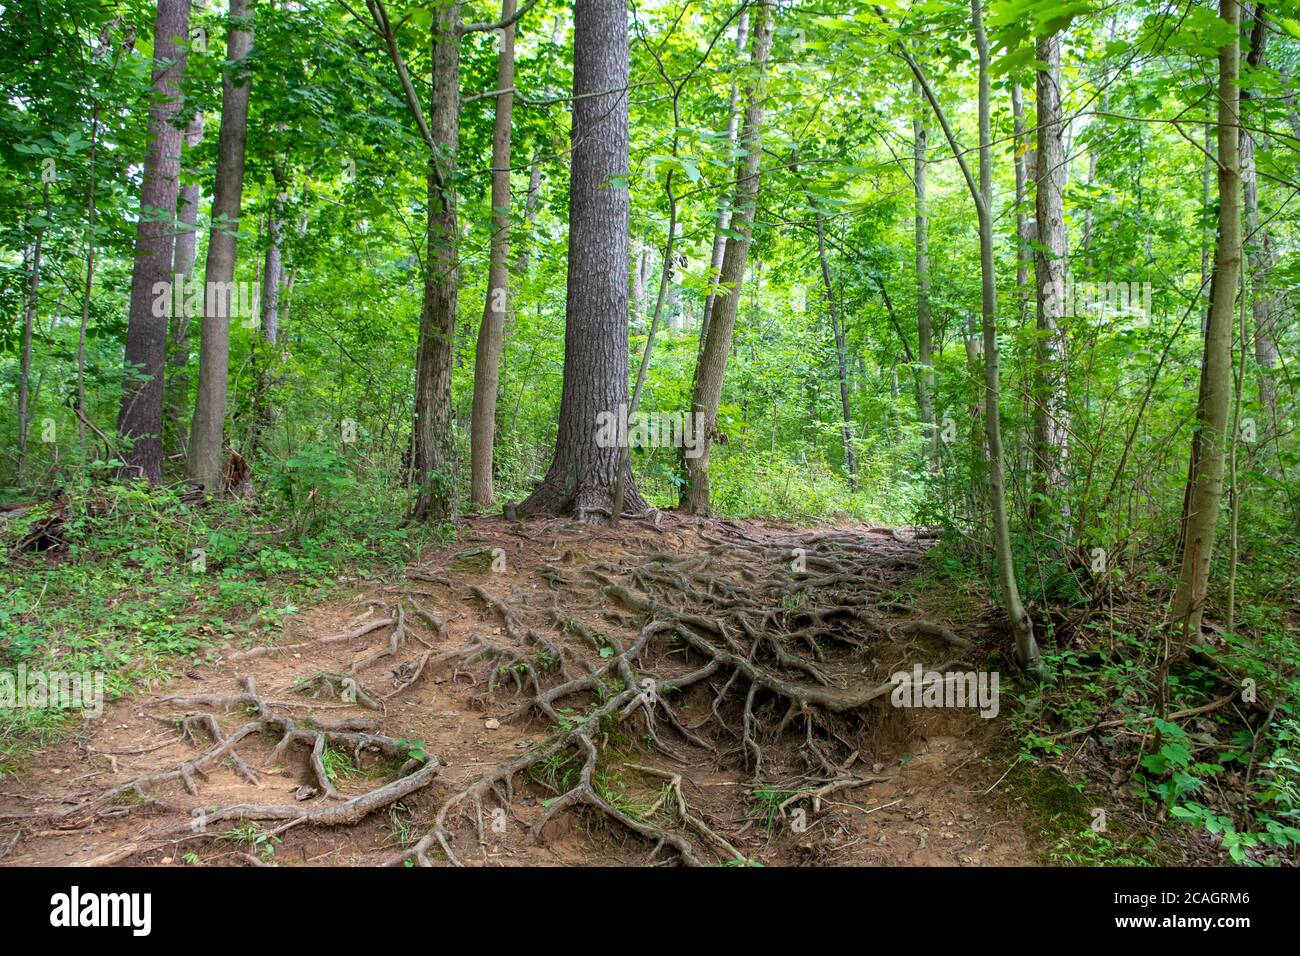 Tangled tree roots line the dirt path through this meditative woodland scene with ethereal green background. Stock Photo